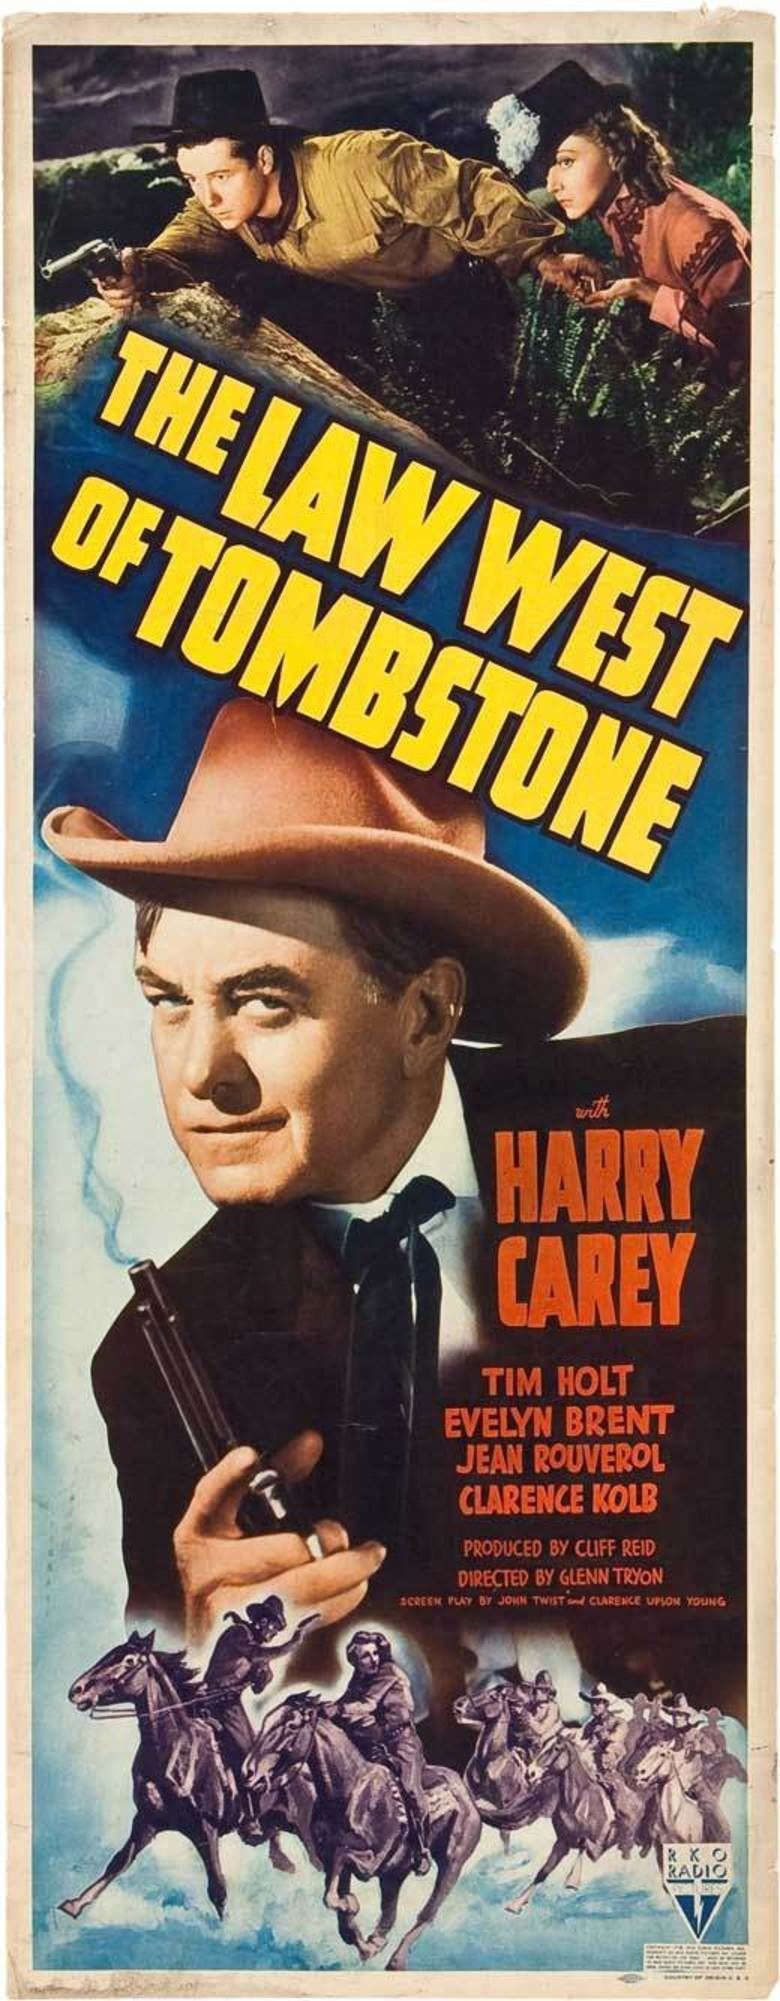 The Law West of Tombstone movie poster